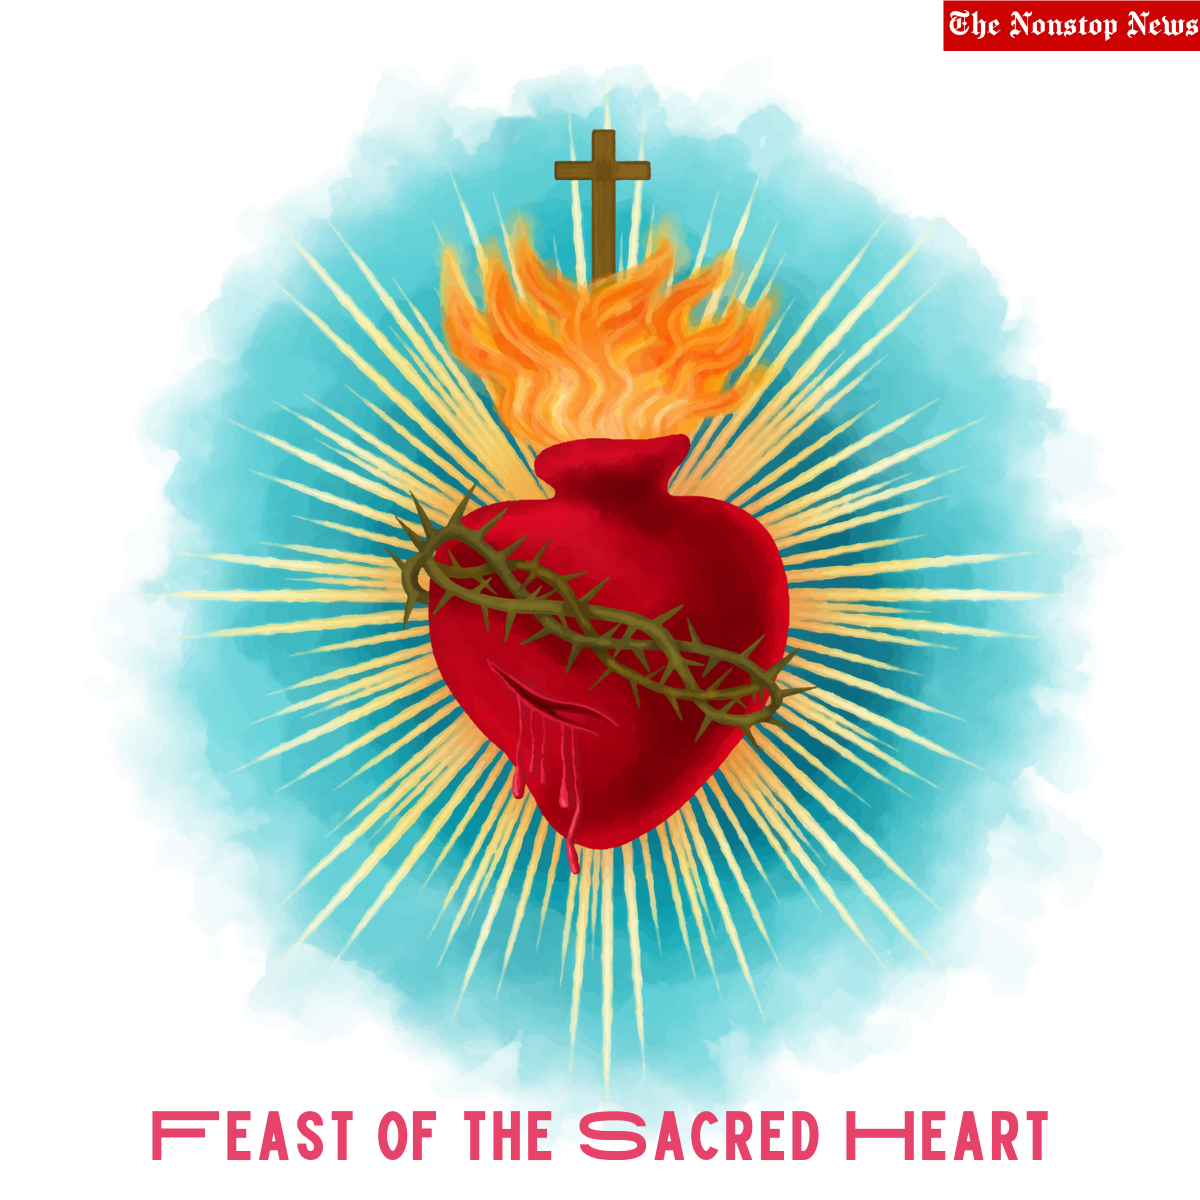 Feast of the Sacred Heart 2022 Wishes, Quotes, Images, Messages